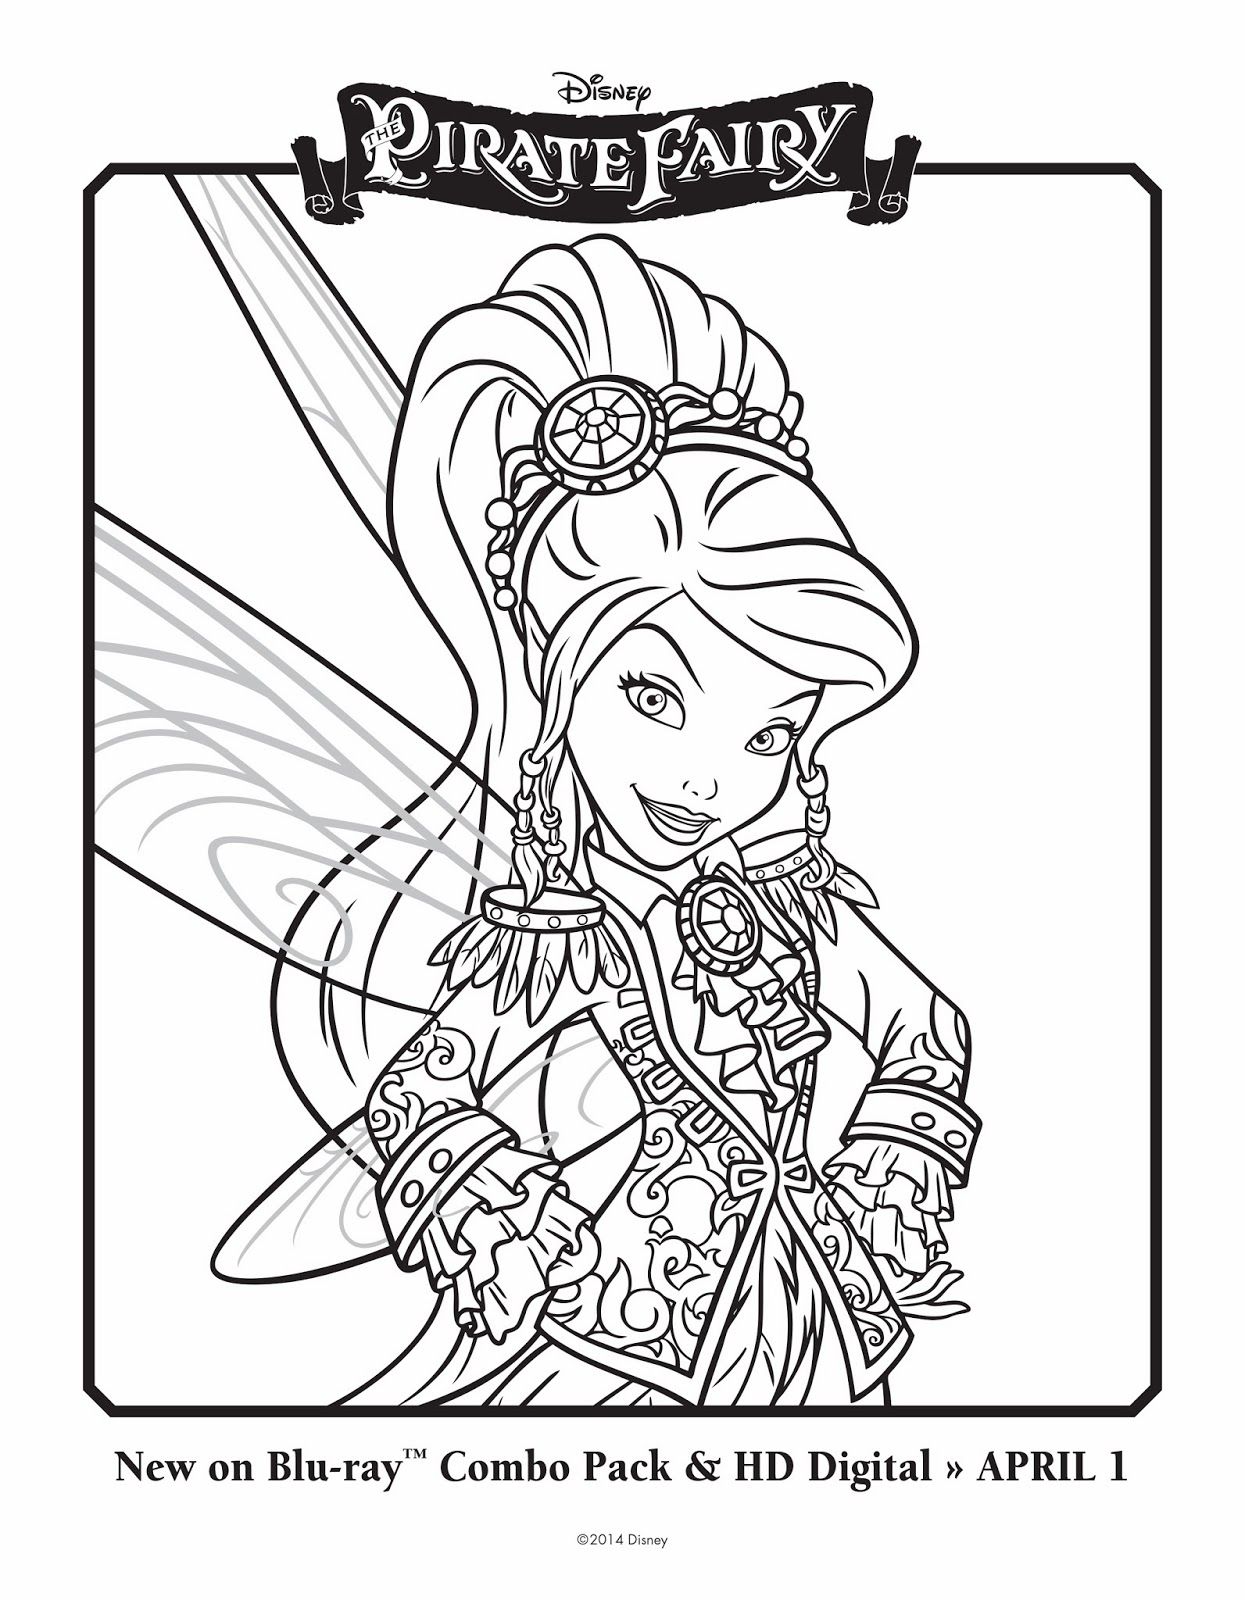 Tinkerbell Pirate Fairy Coloring Pages | Cooloring.com